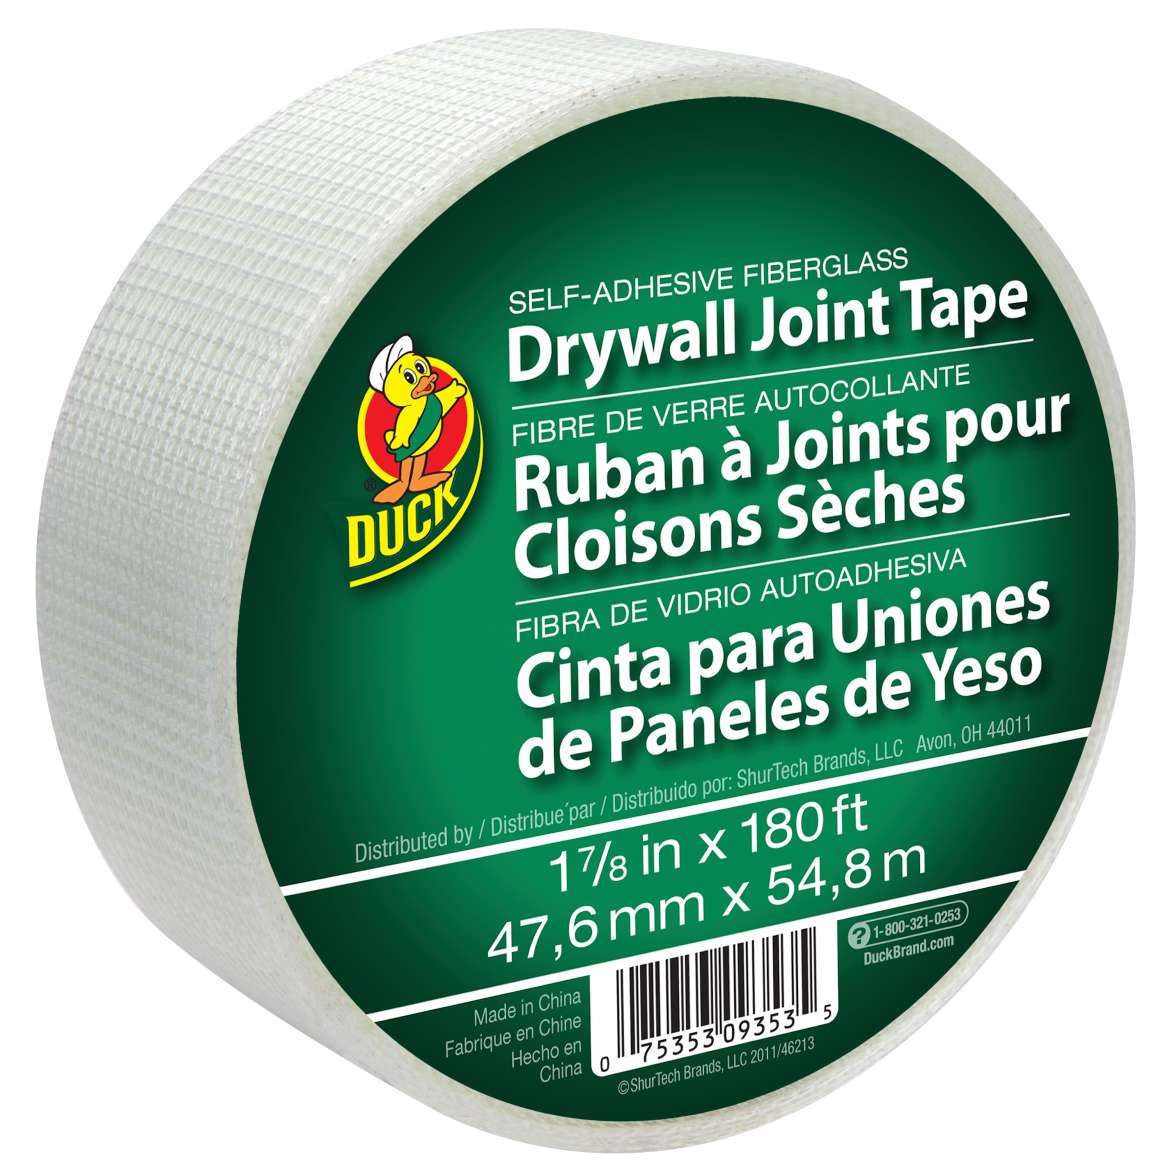 Drywall Joint Tape Image